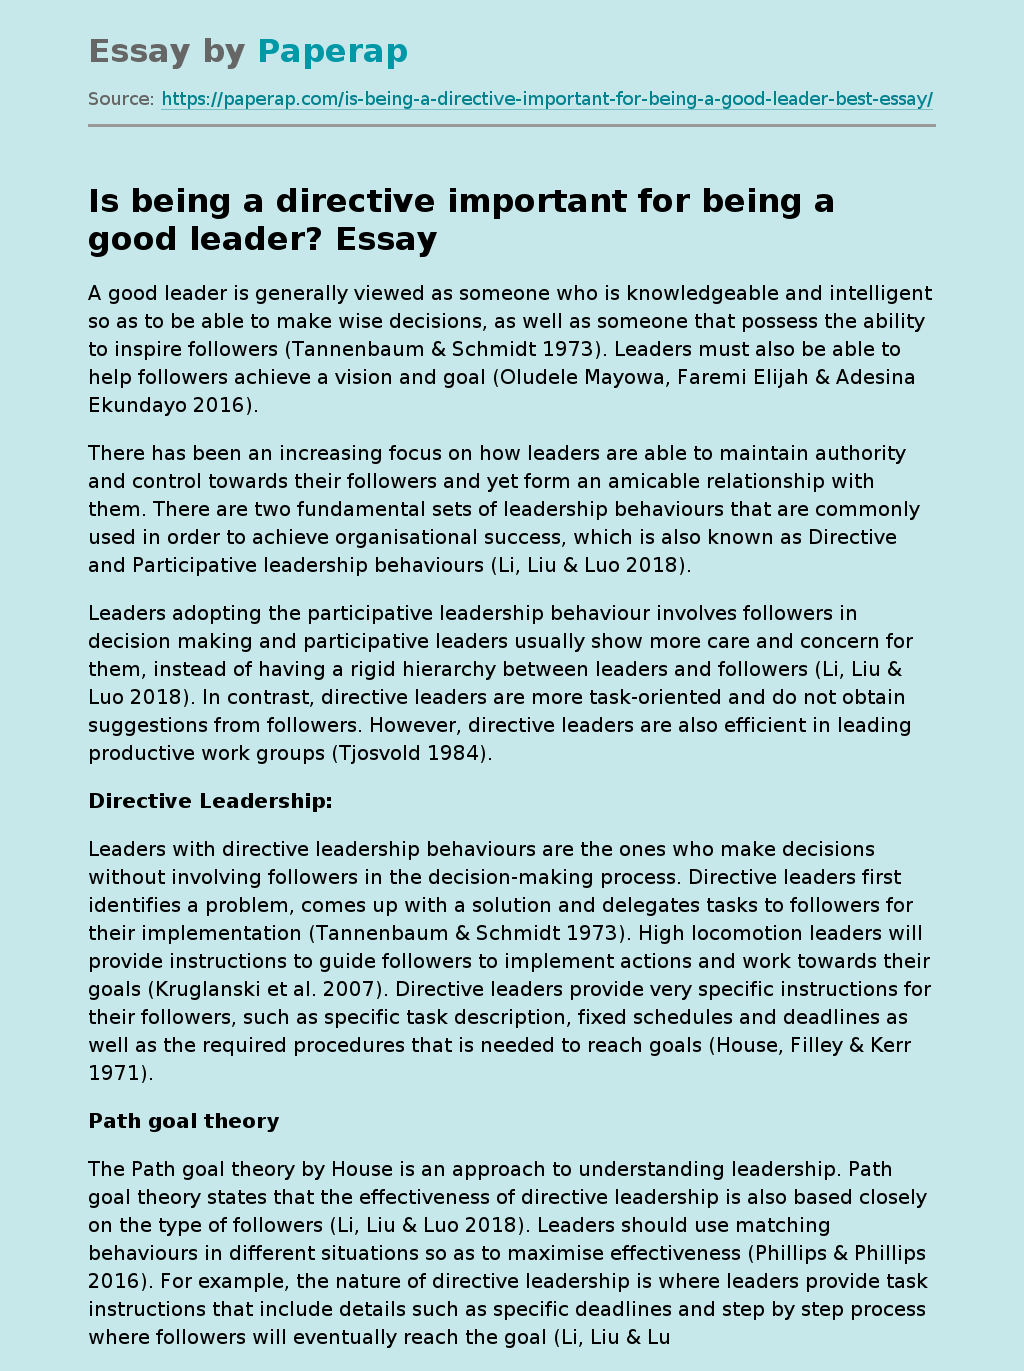 Is being a directive important for being a good leader?